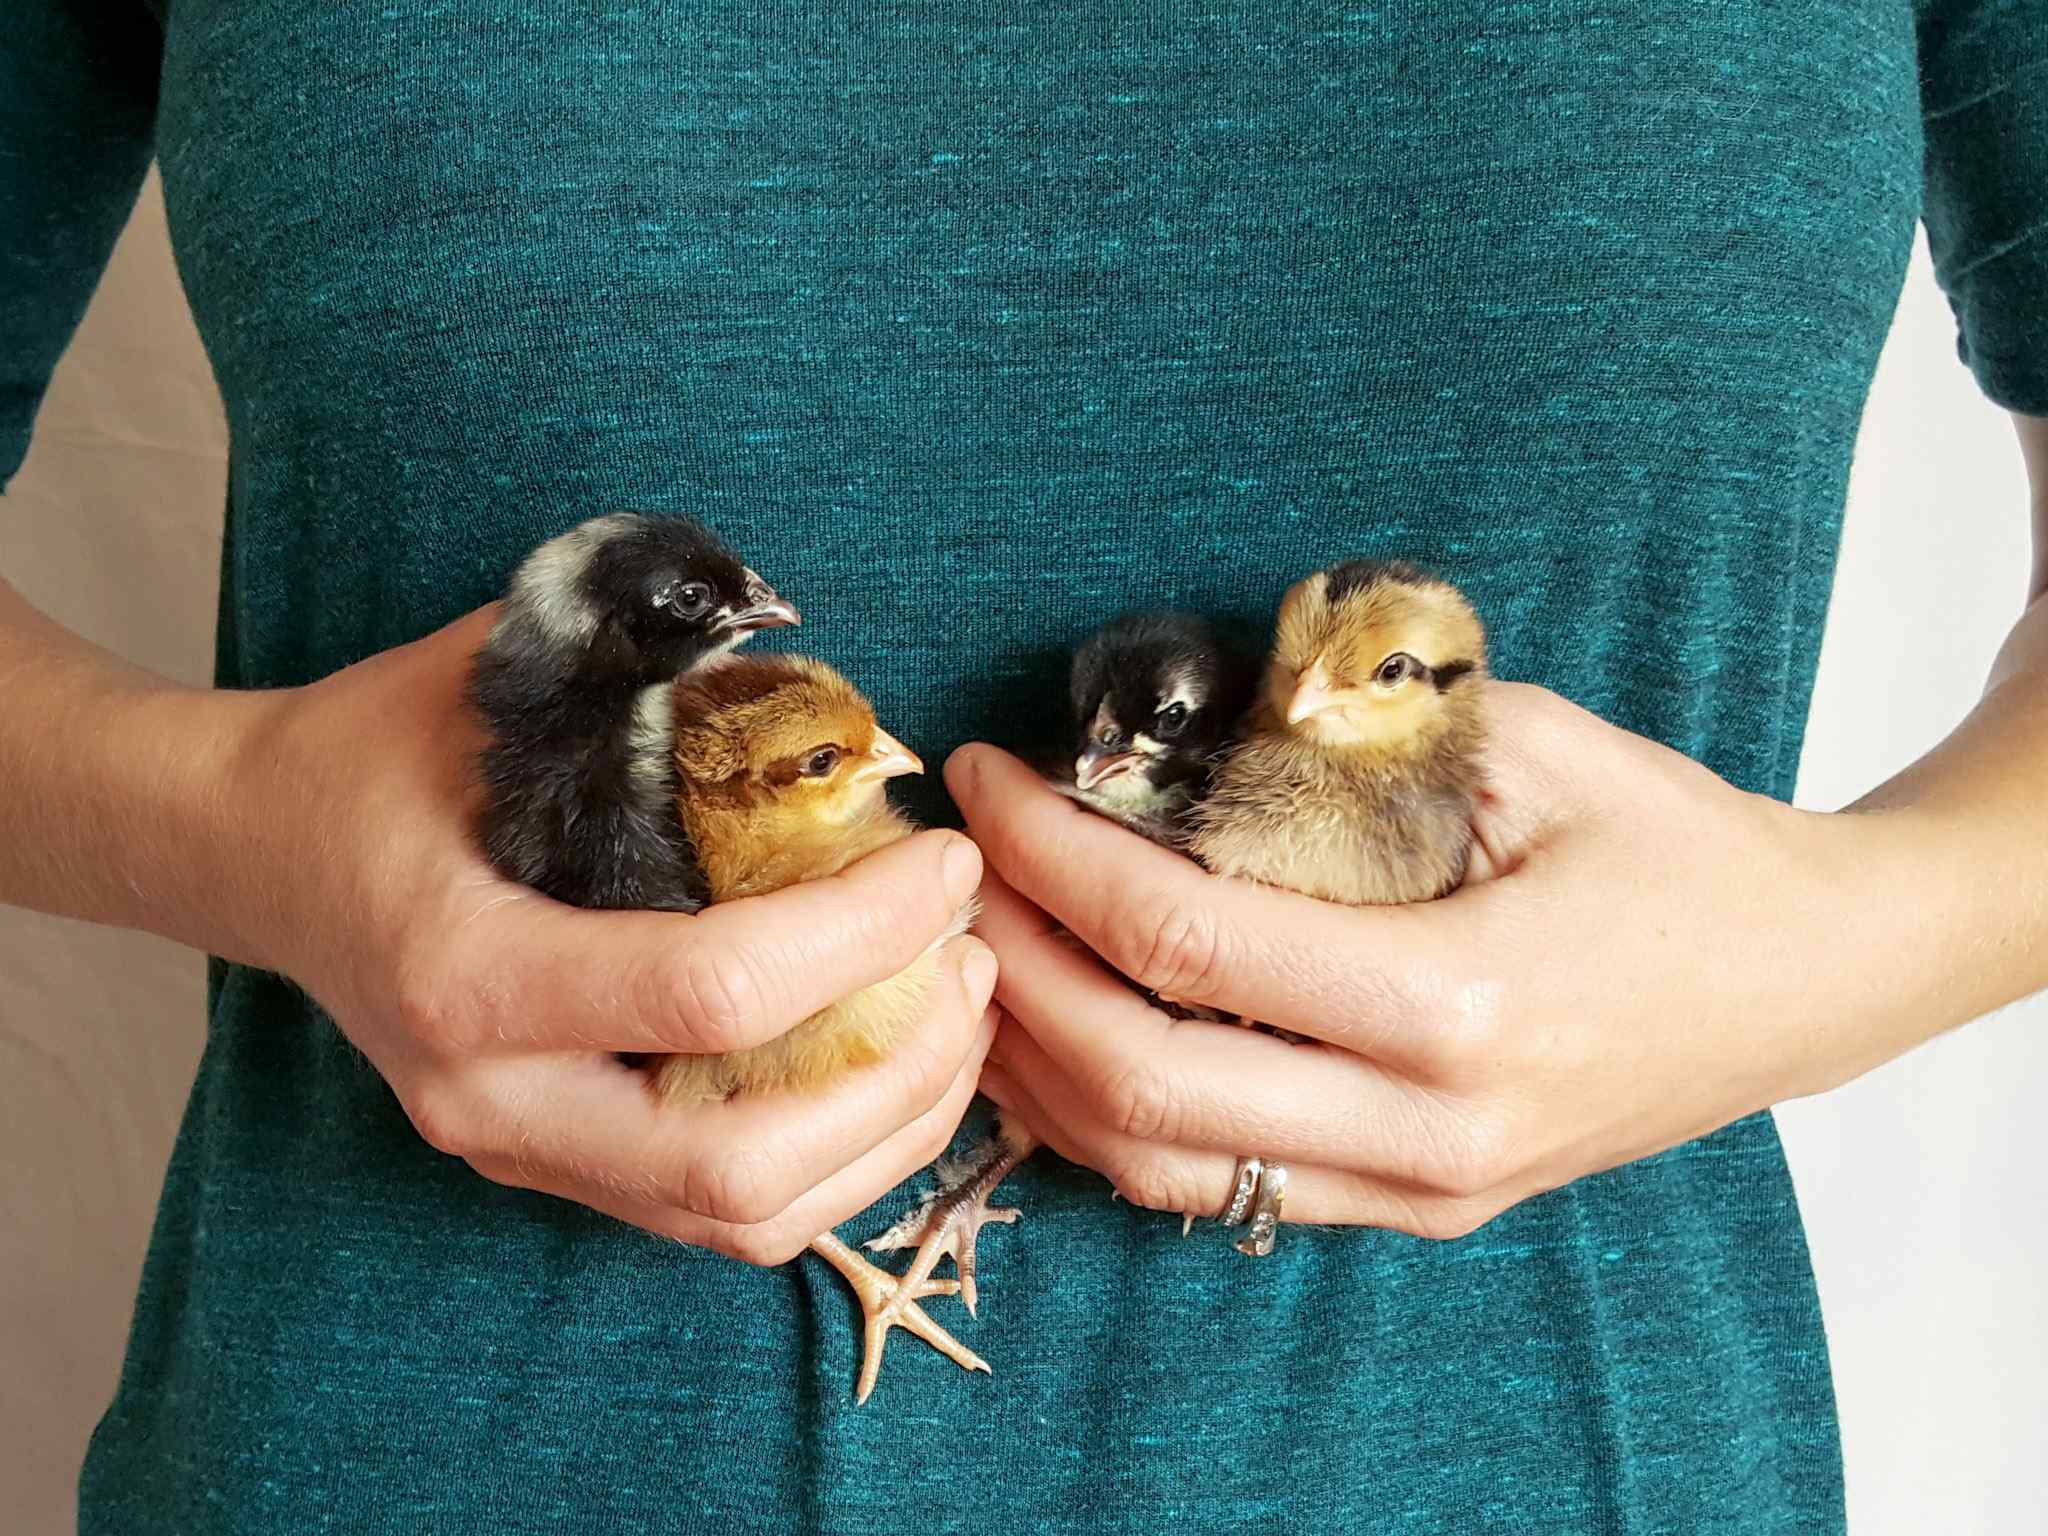 DeannaCat is cradling four chicks between two hands and hers torso. Two of the chicks are golden brown in color while the other two are black and white. Chickens can be an important step when deciding to start a homestead. 